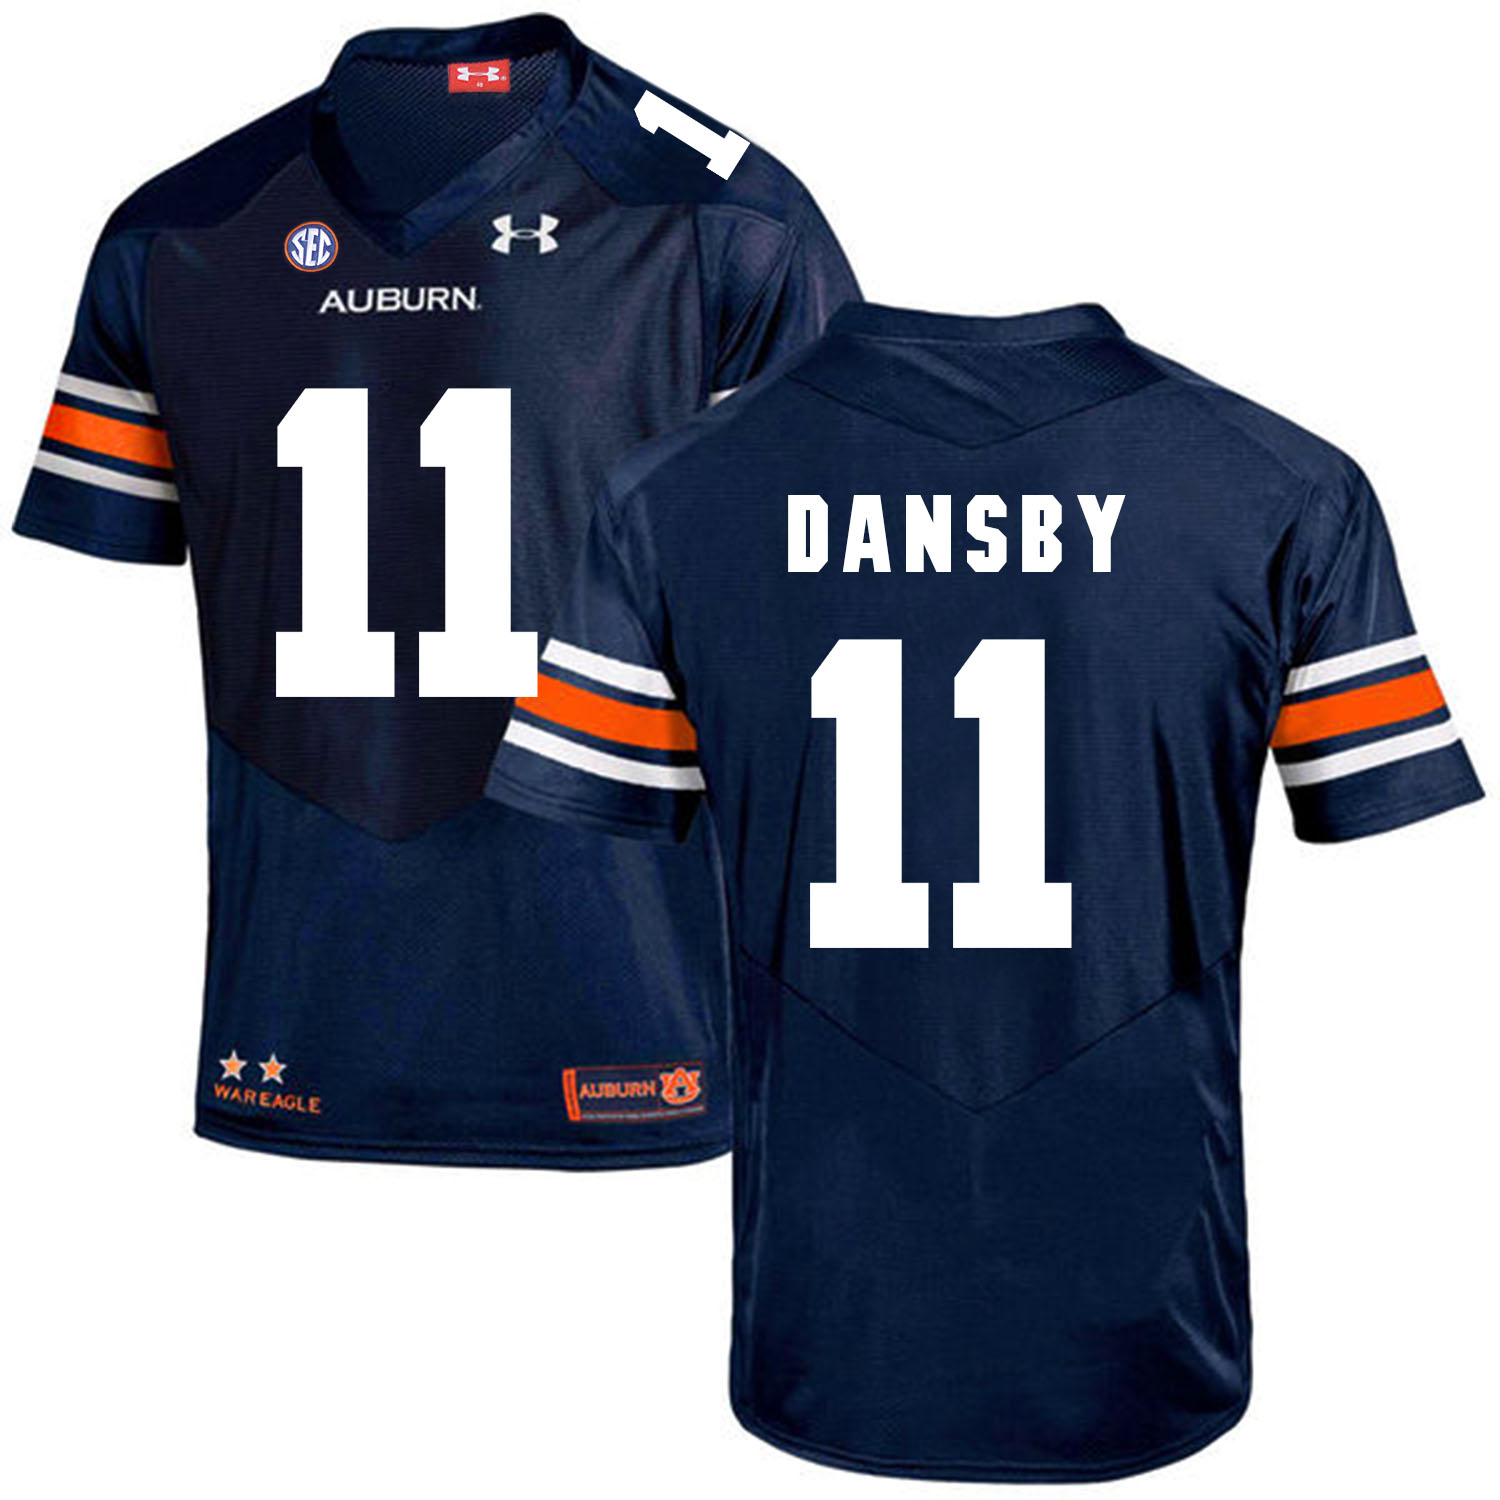 Auburn Tigers 11 Karlos Dansby Navy College Football Jersey